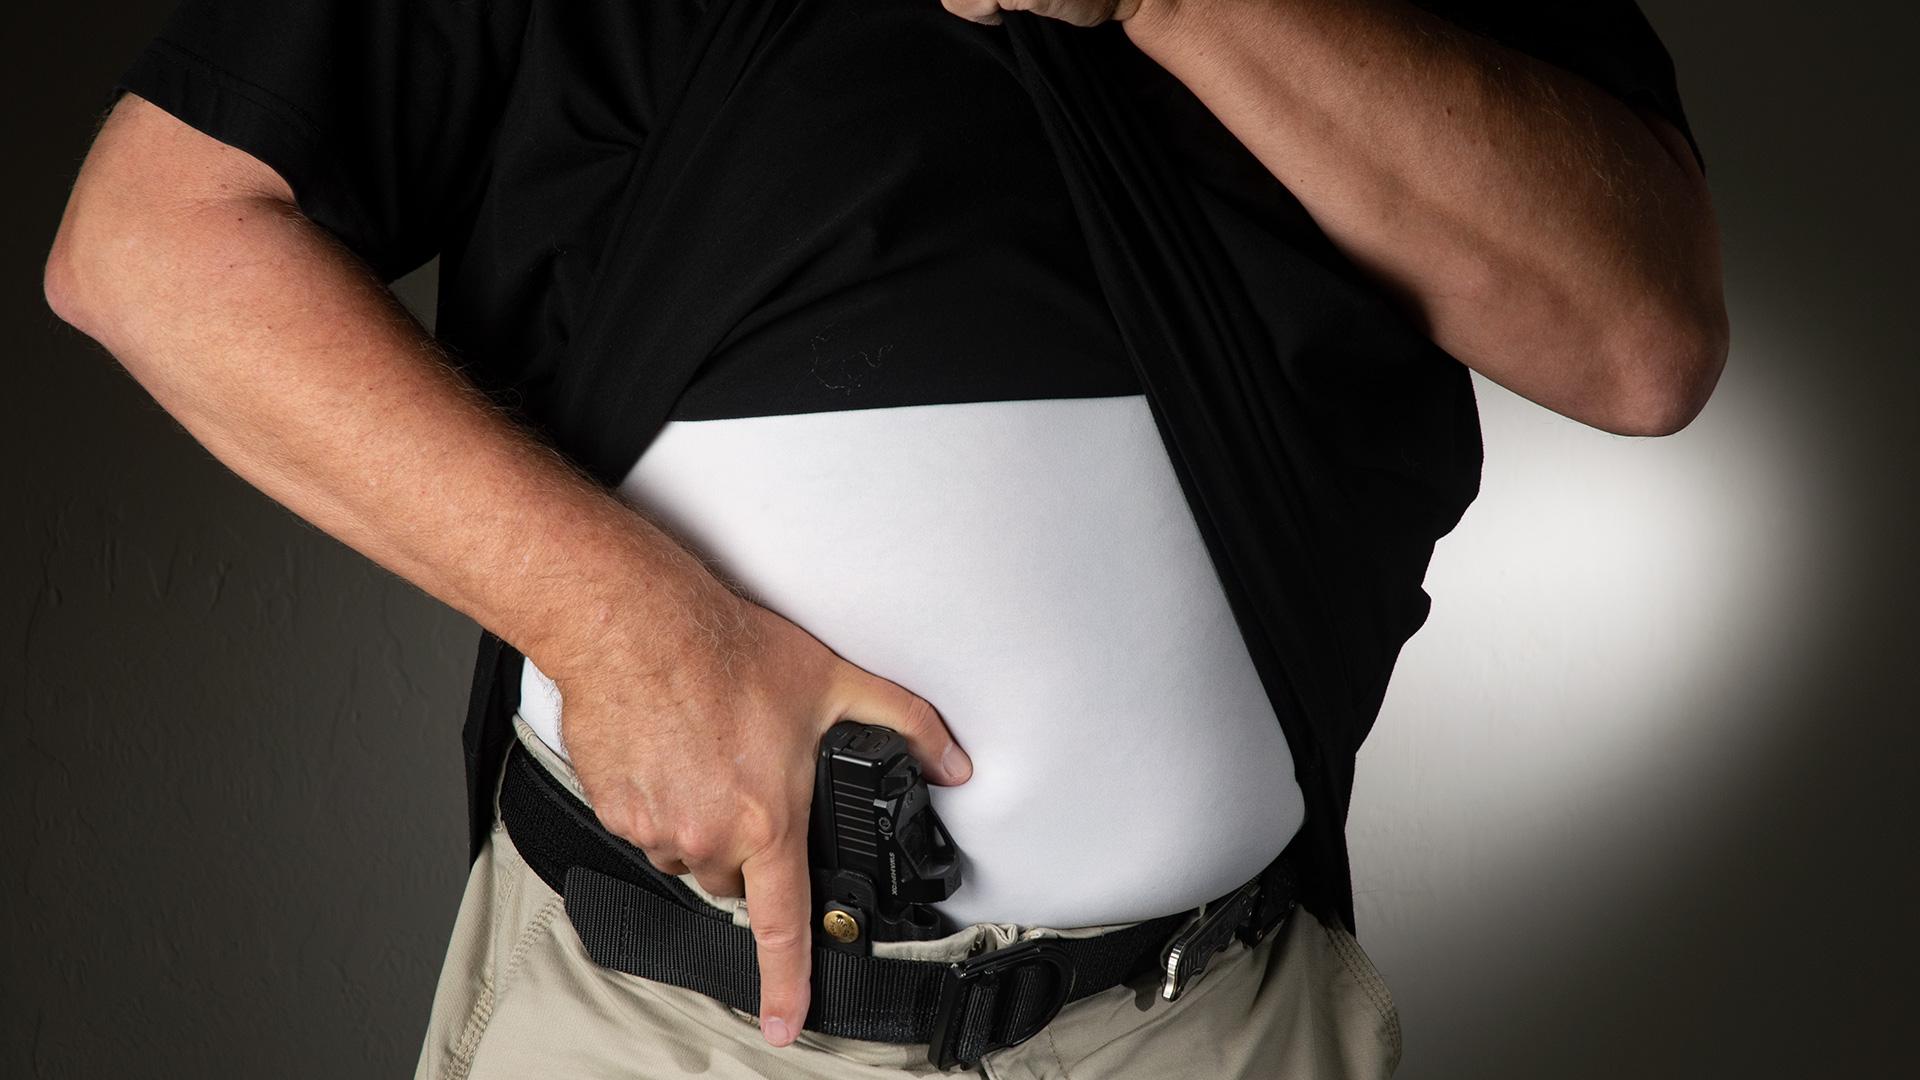 How to Find The Best Concealed Carry Holster